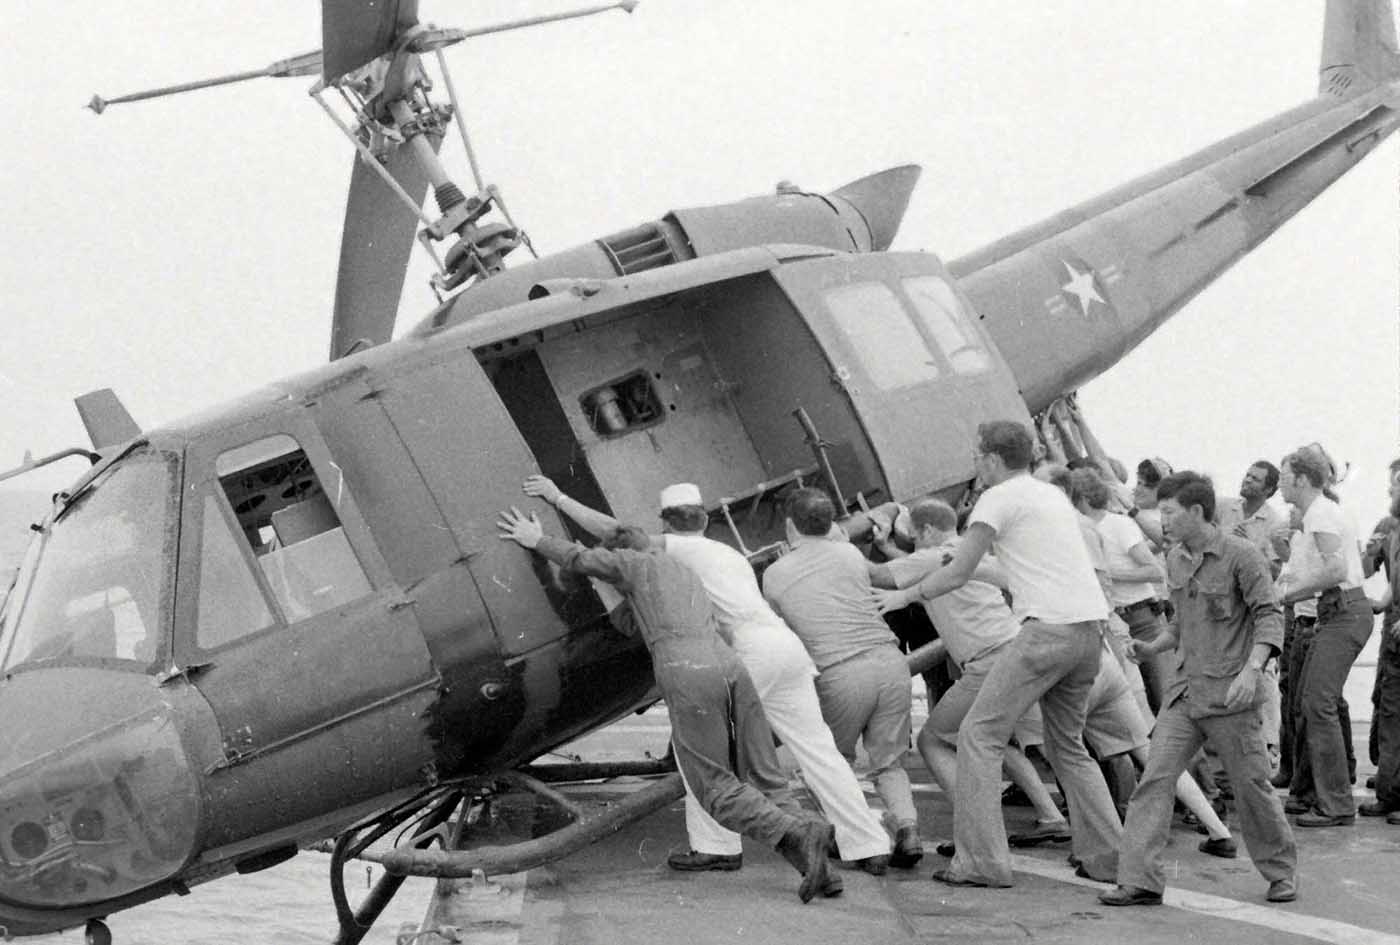 When US Military pushed Helicopters overboard to make room for Vietnam War evacuees, 1975